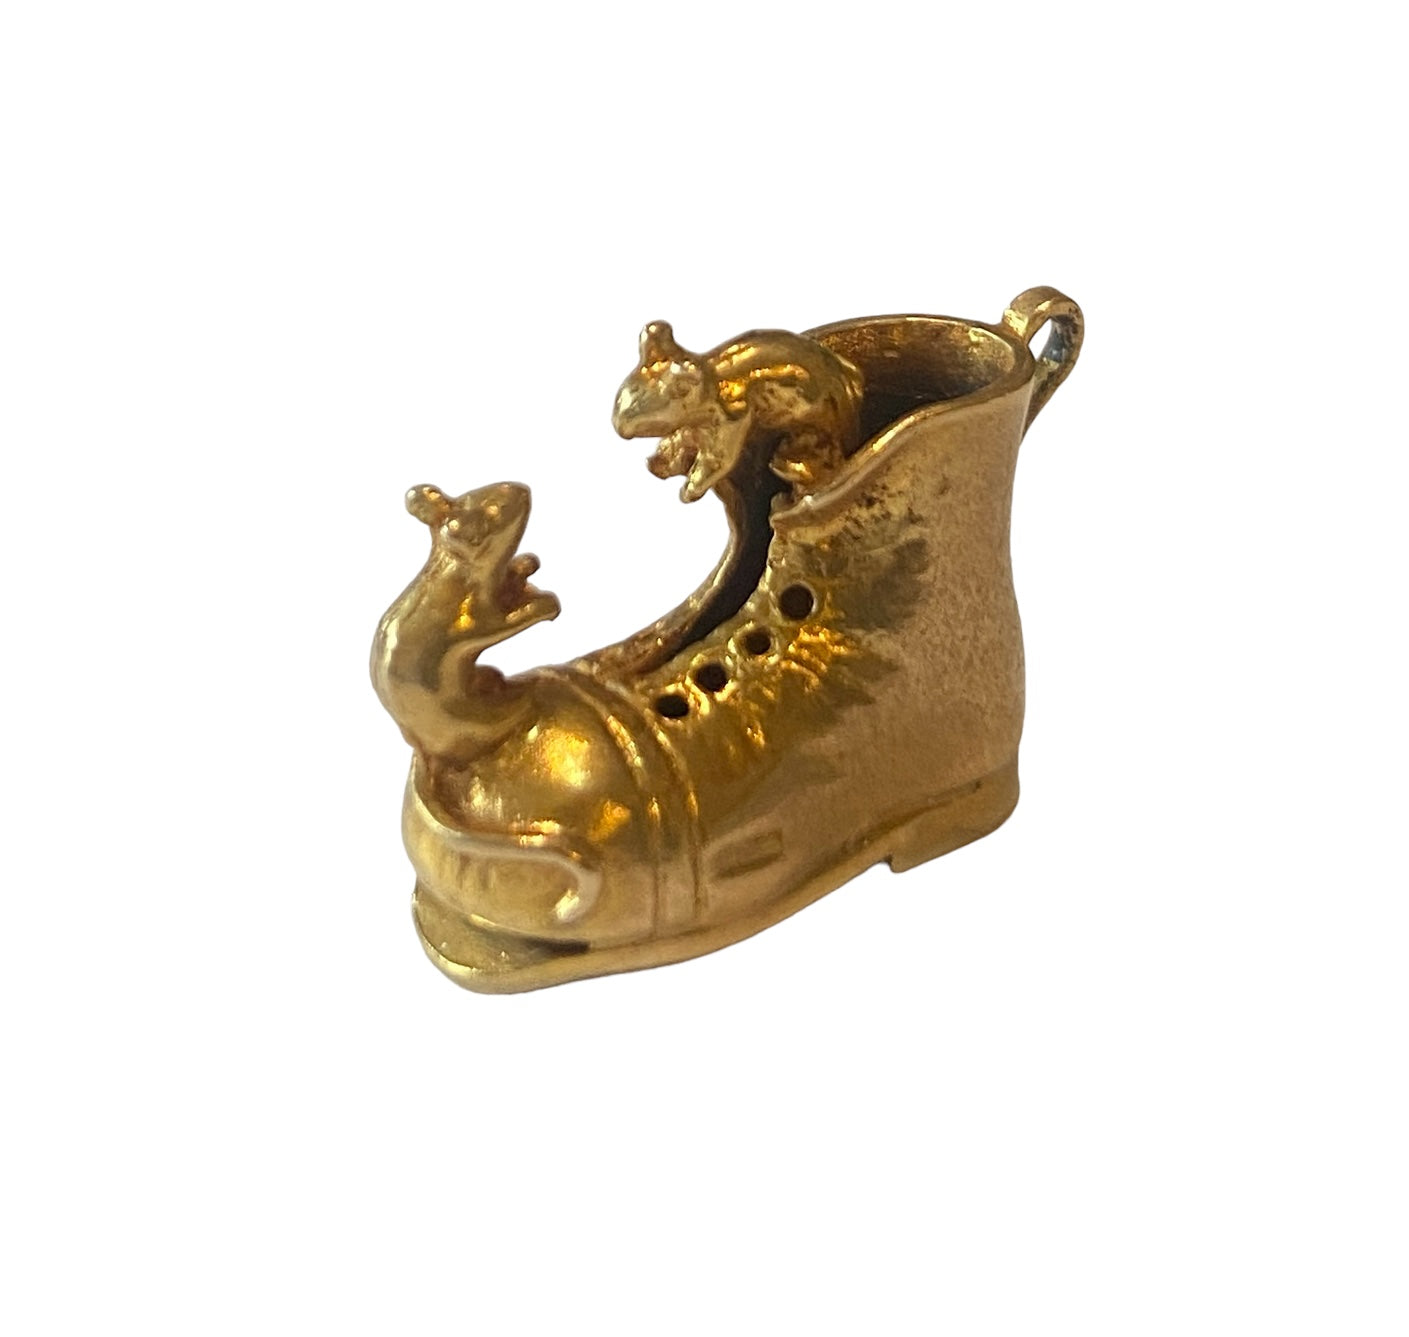 9ct vintage boot charm with mice circa 1964